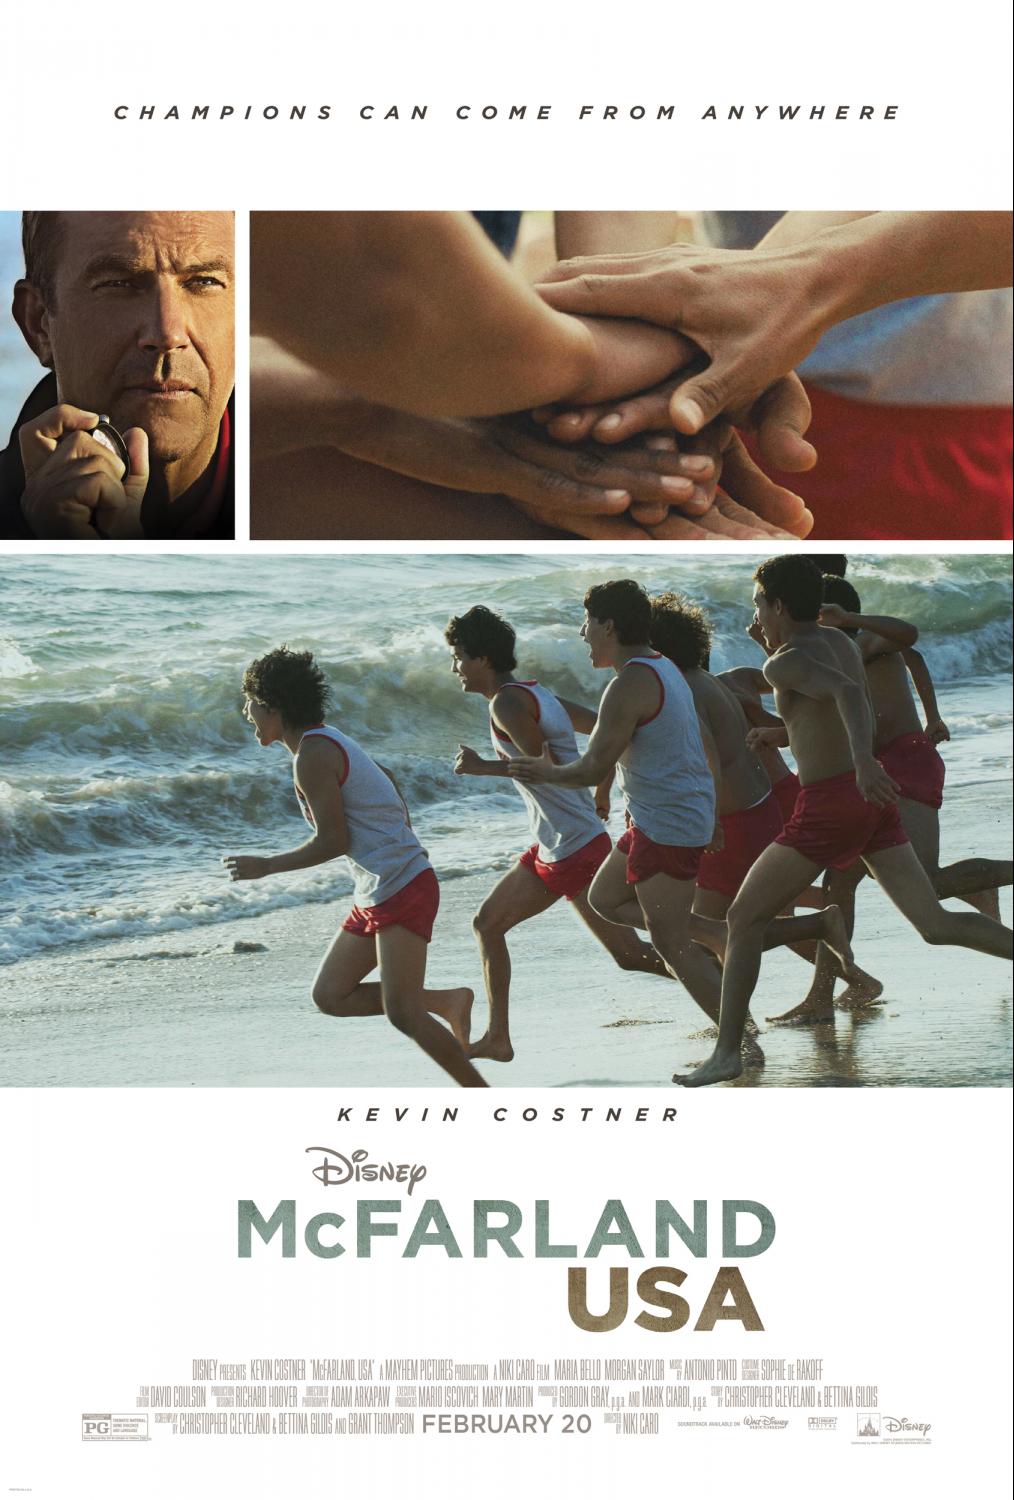 “McFarland, USA” coming to theatres in February